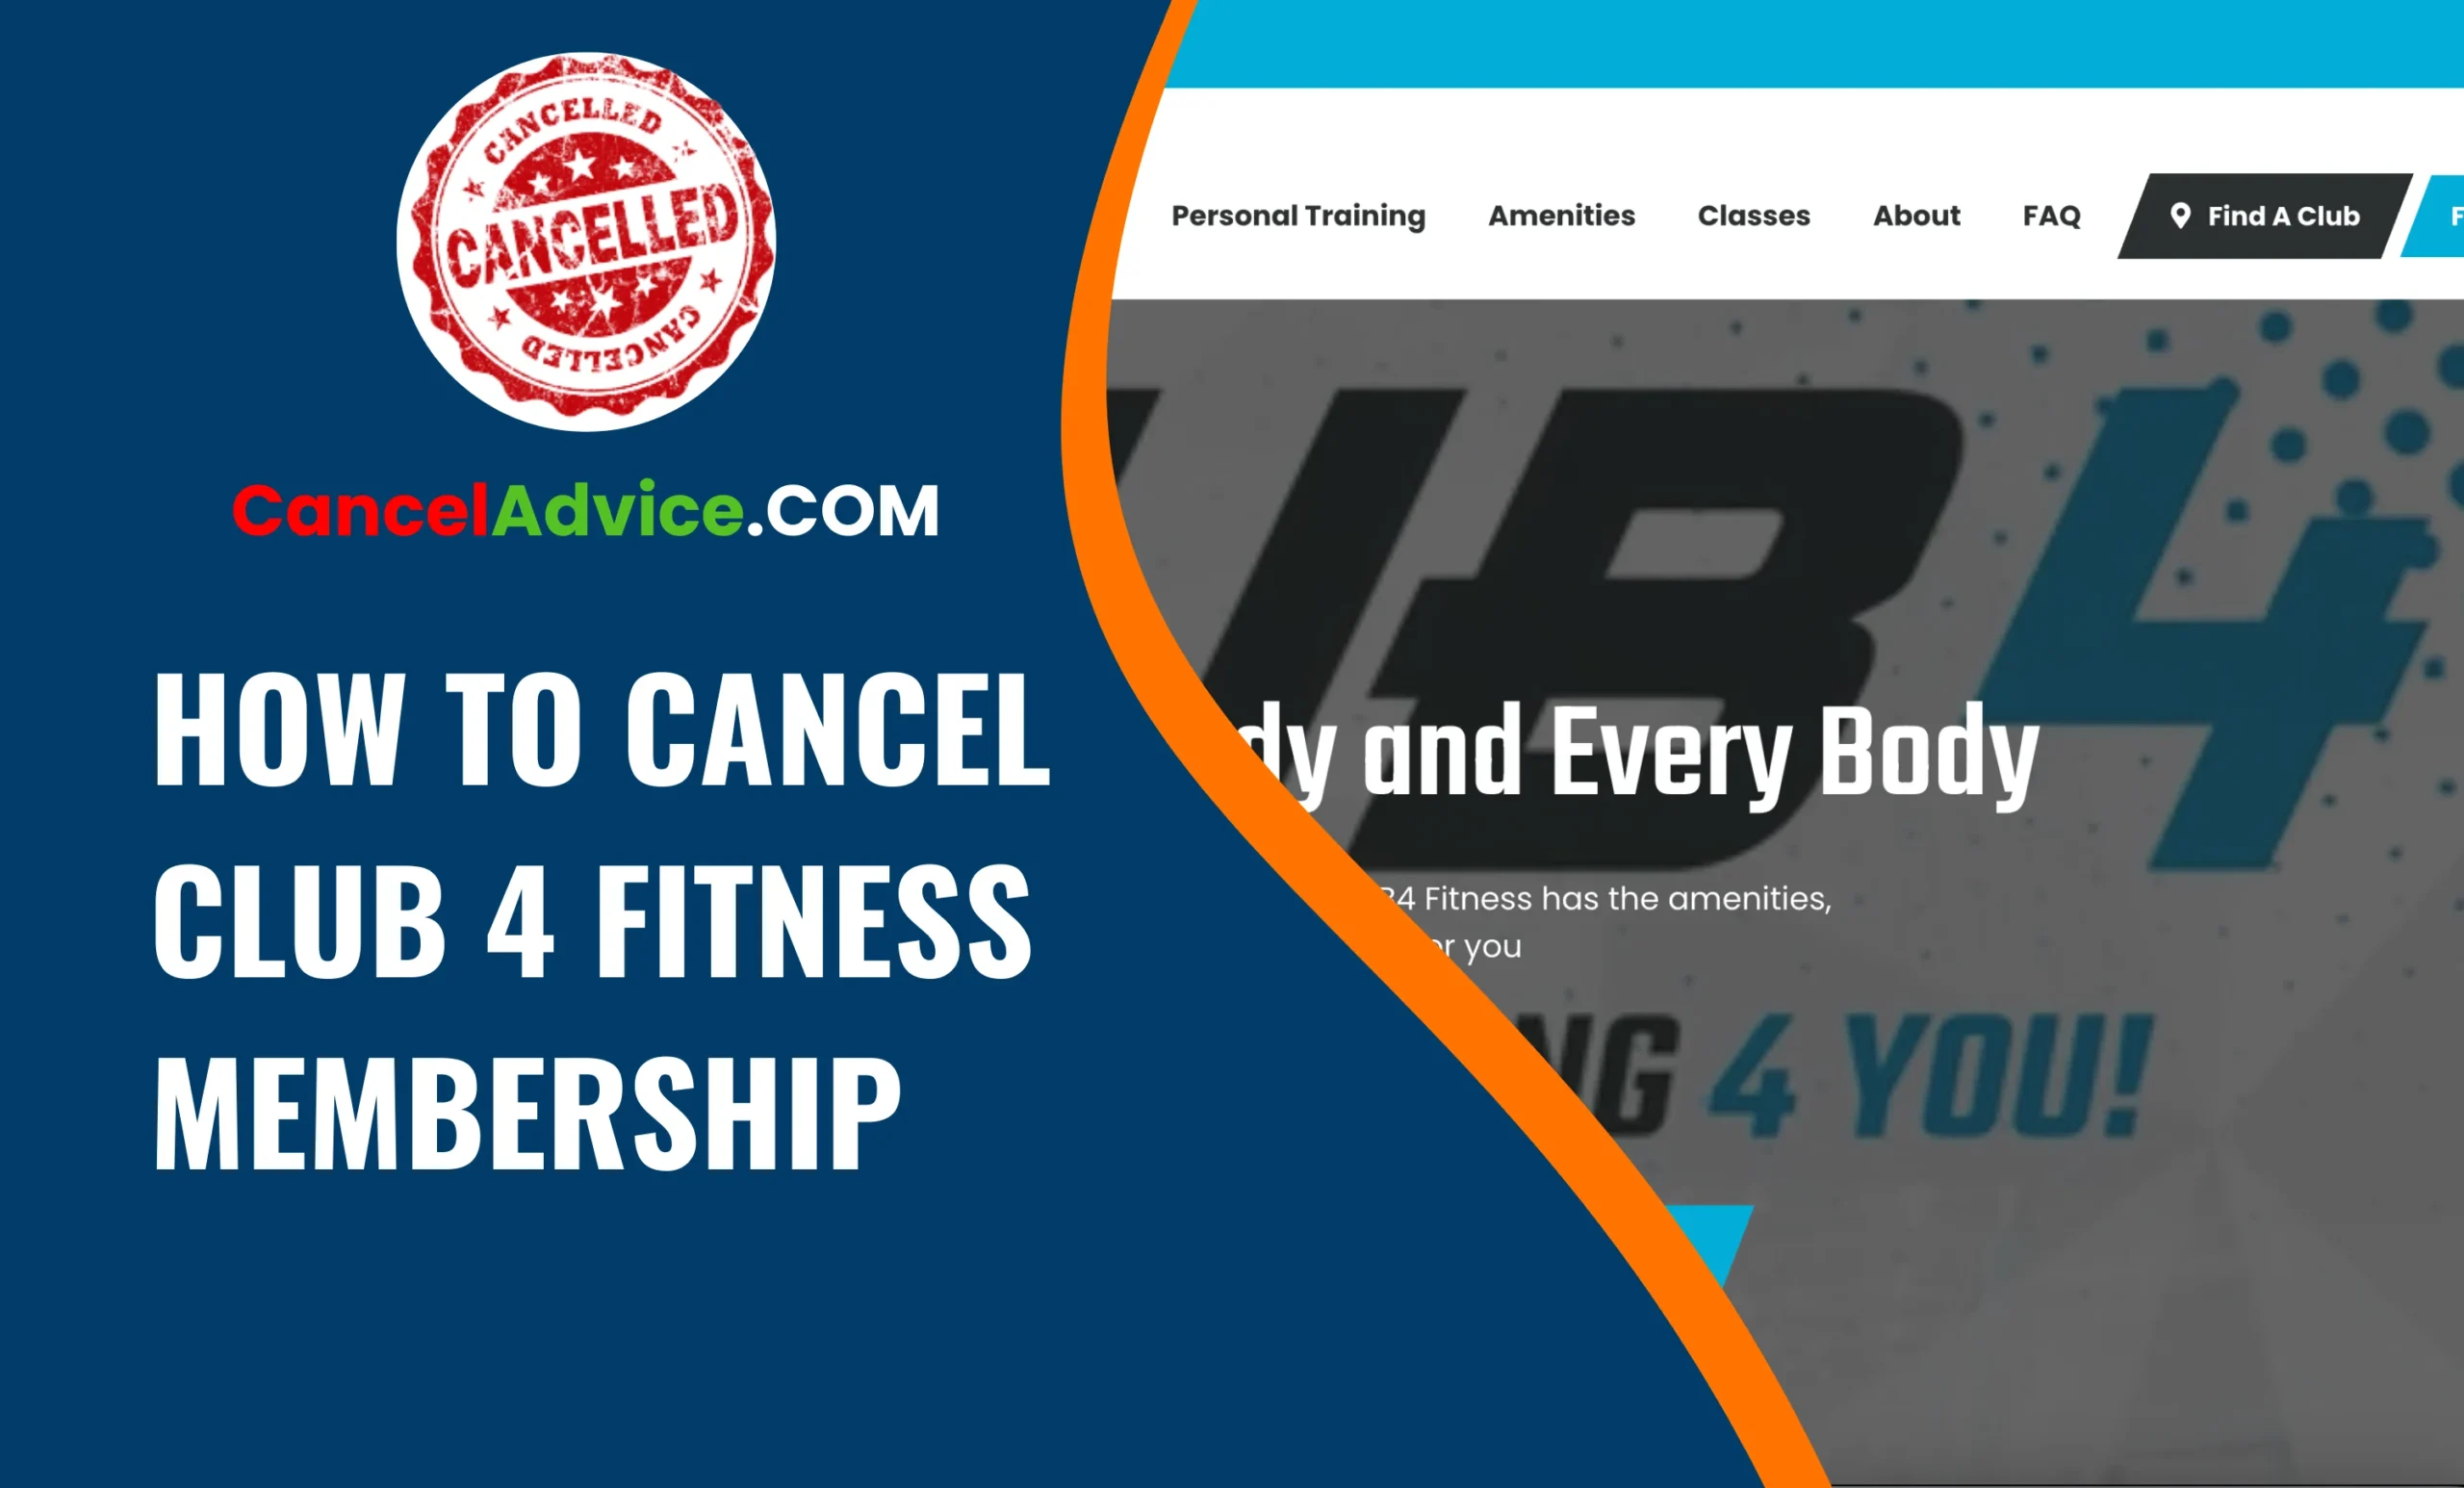 How To Cancel Club 4 Fitness Membership